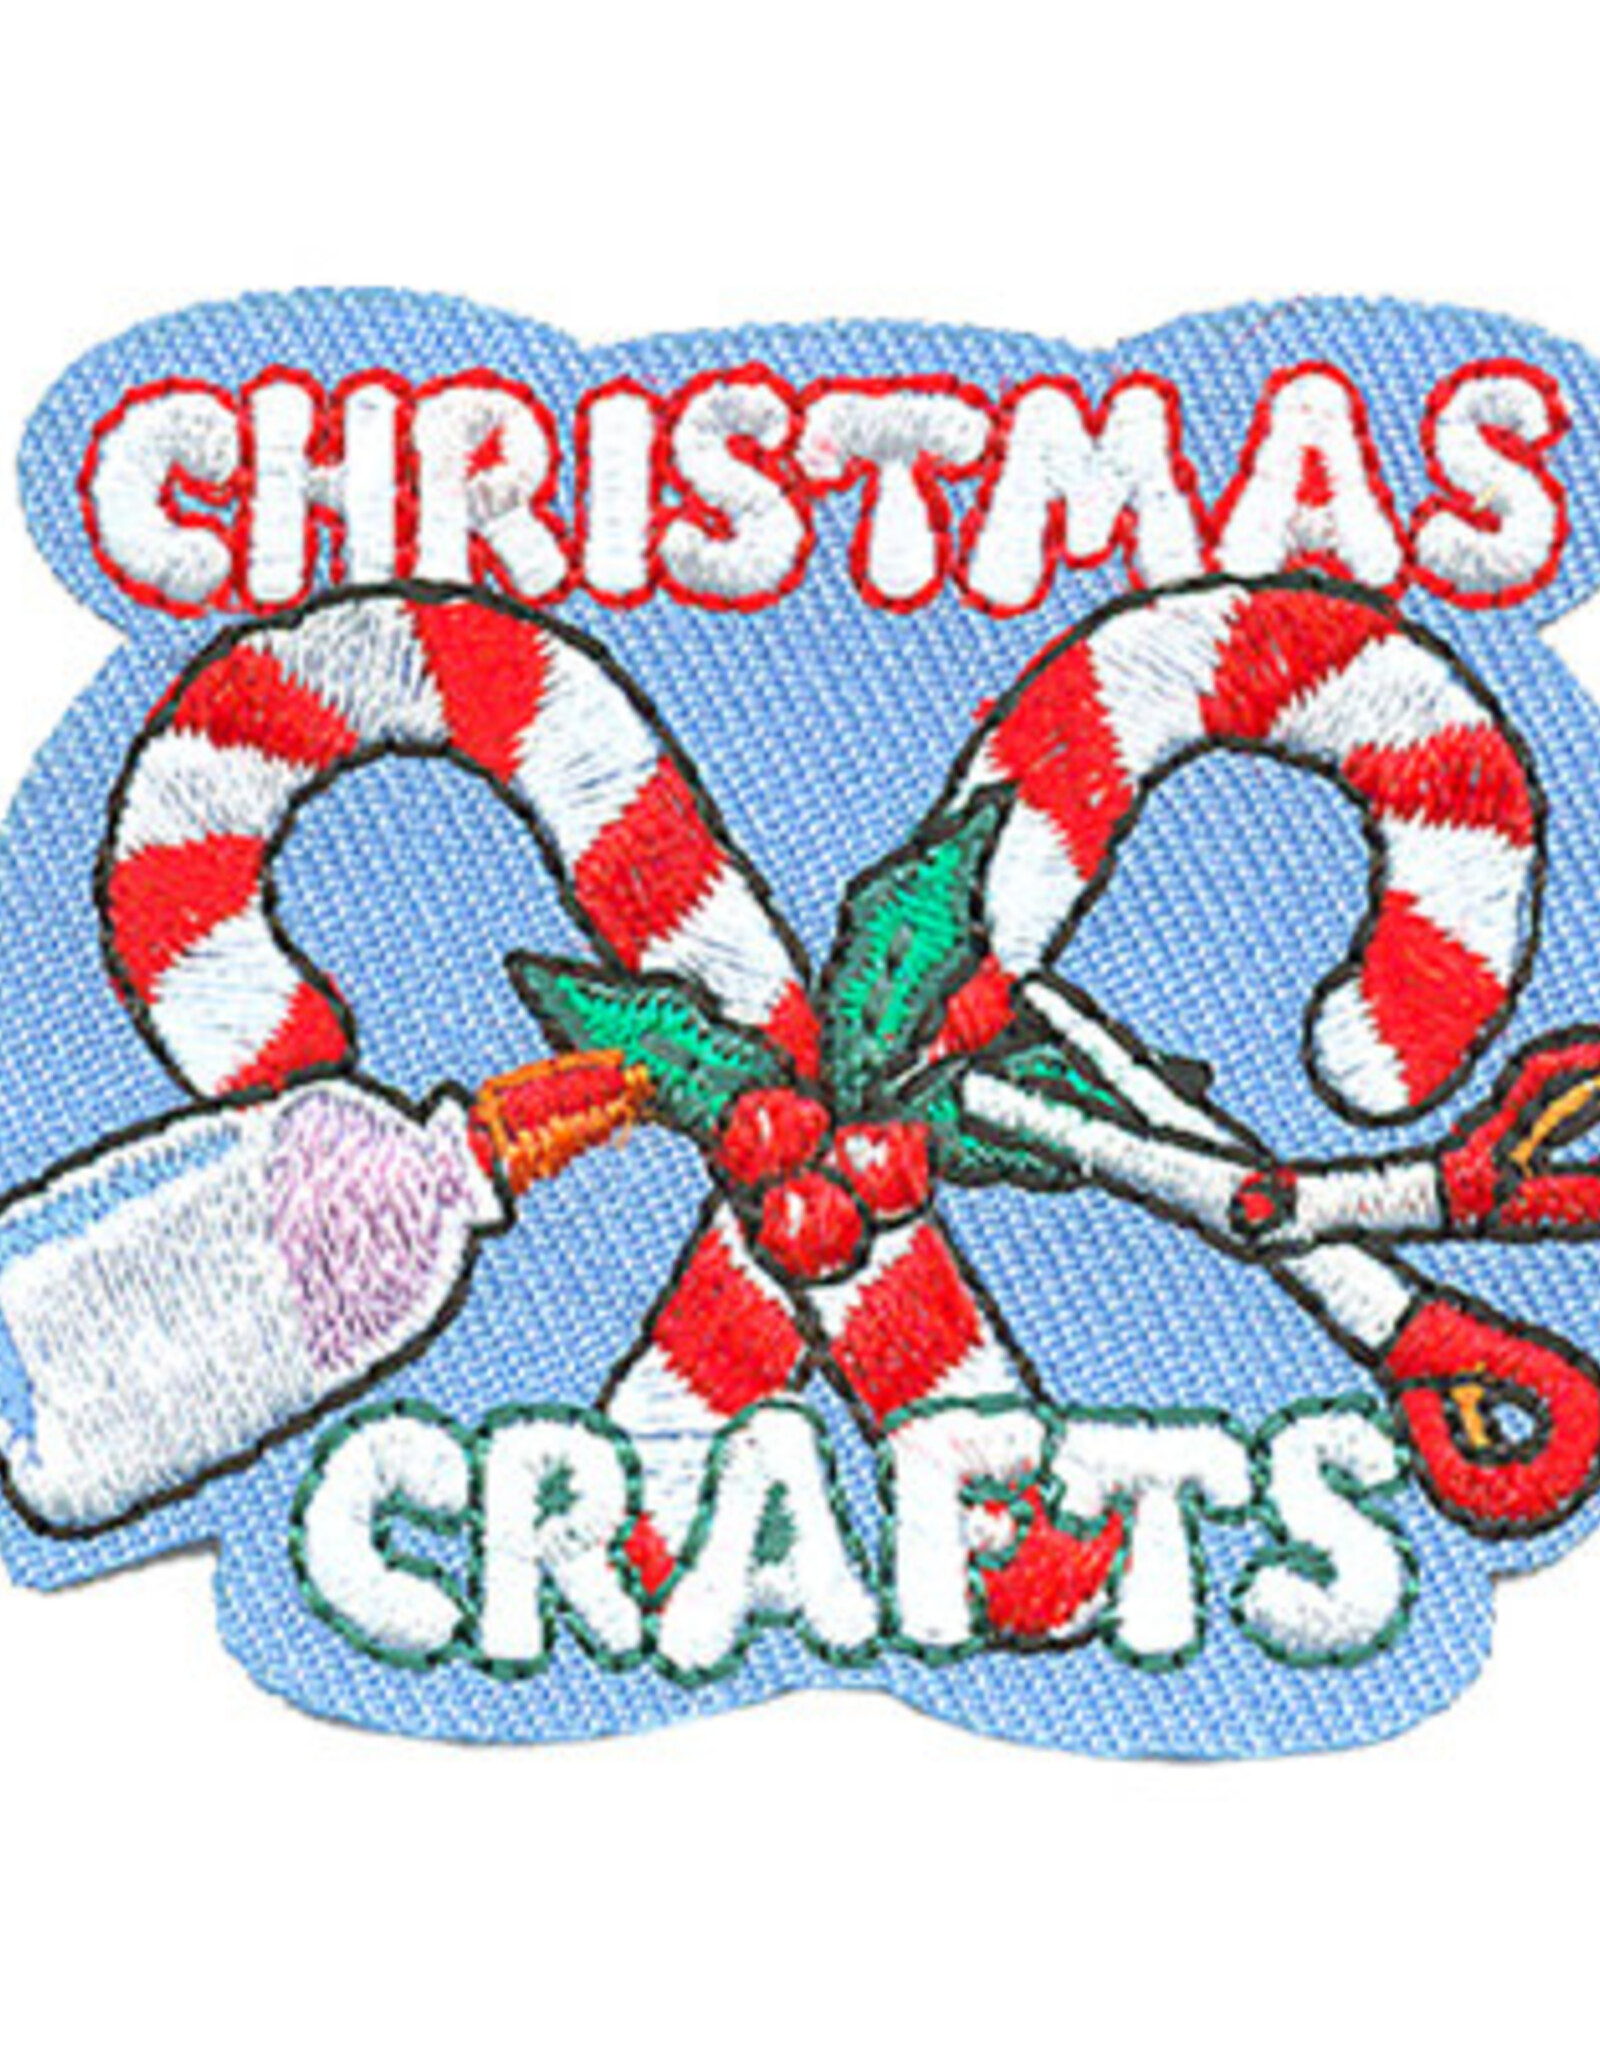 Christmas Crafts (Candy Cane) Fun Patch